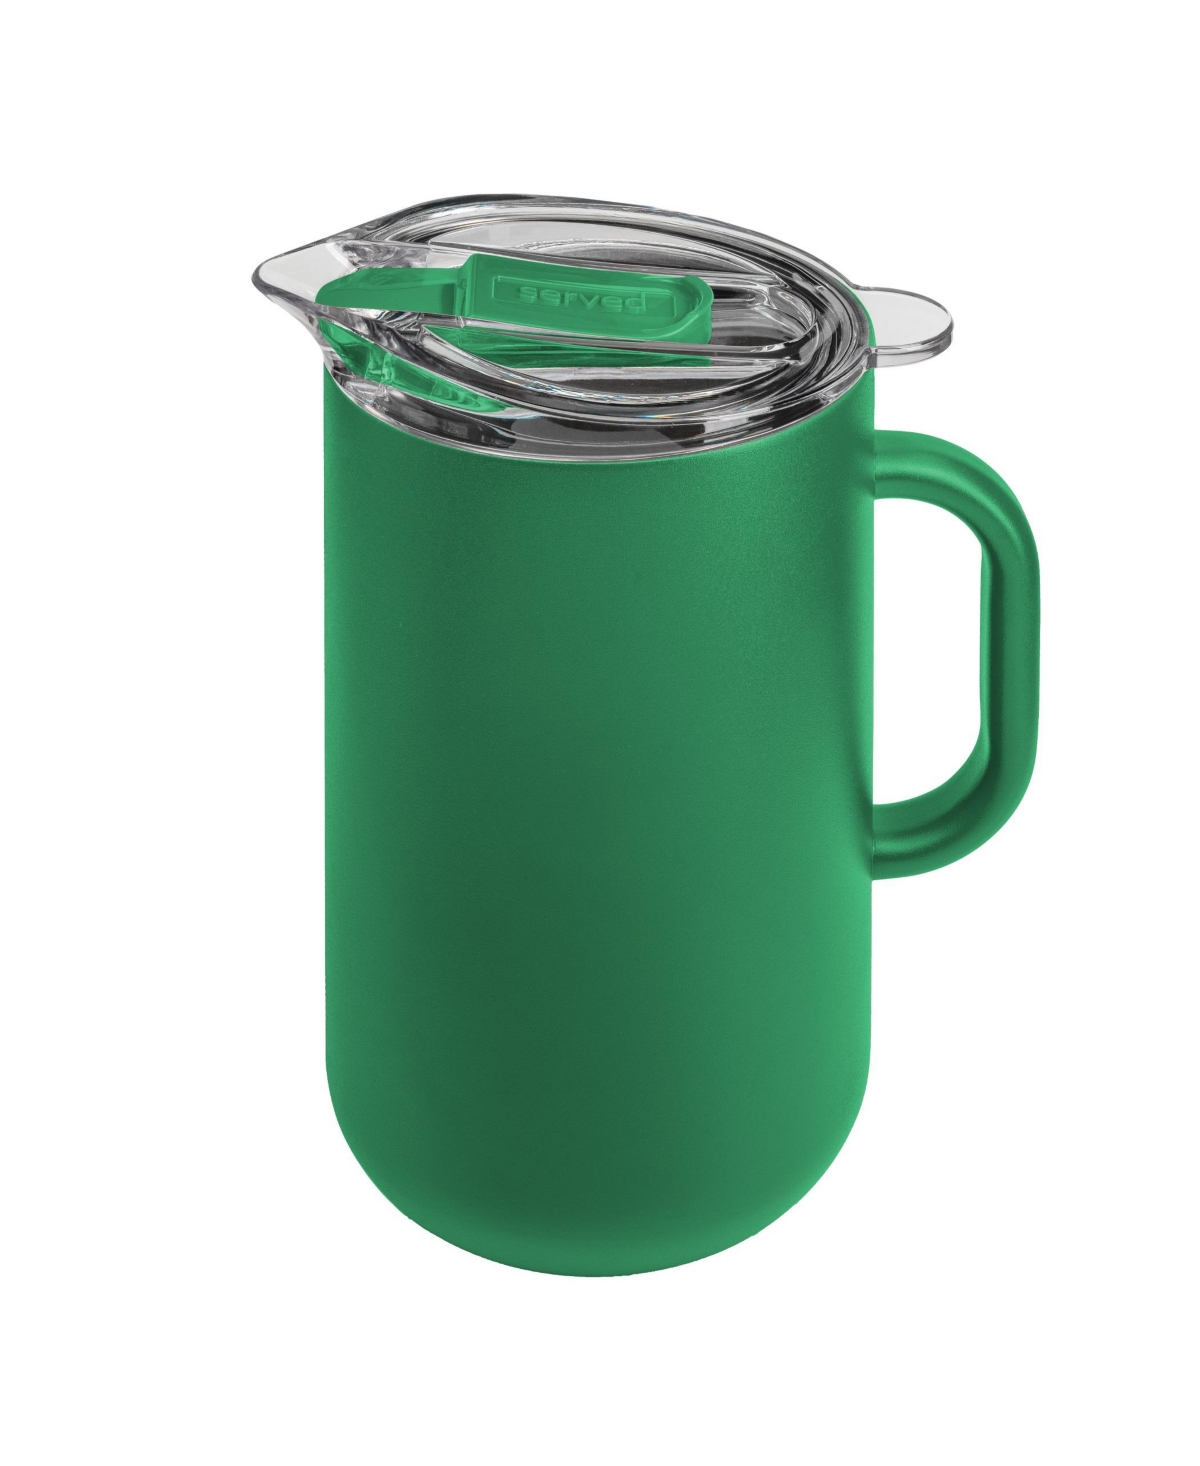 Served Vacuum-insulated Double-walled Copper-lined Stainless Steel Pitcher, 2 Liter In Greens